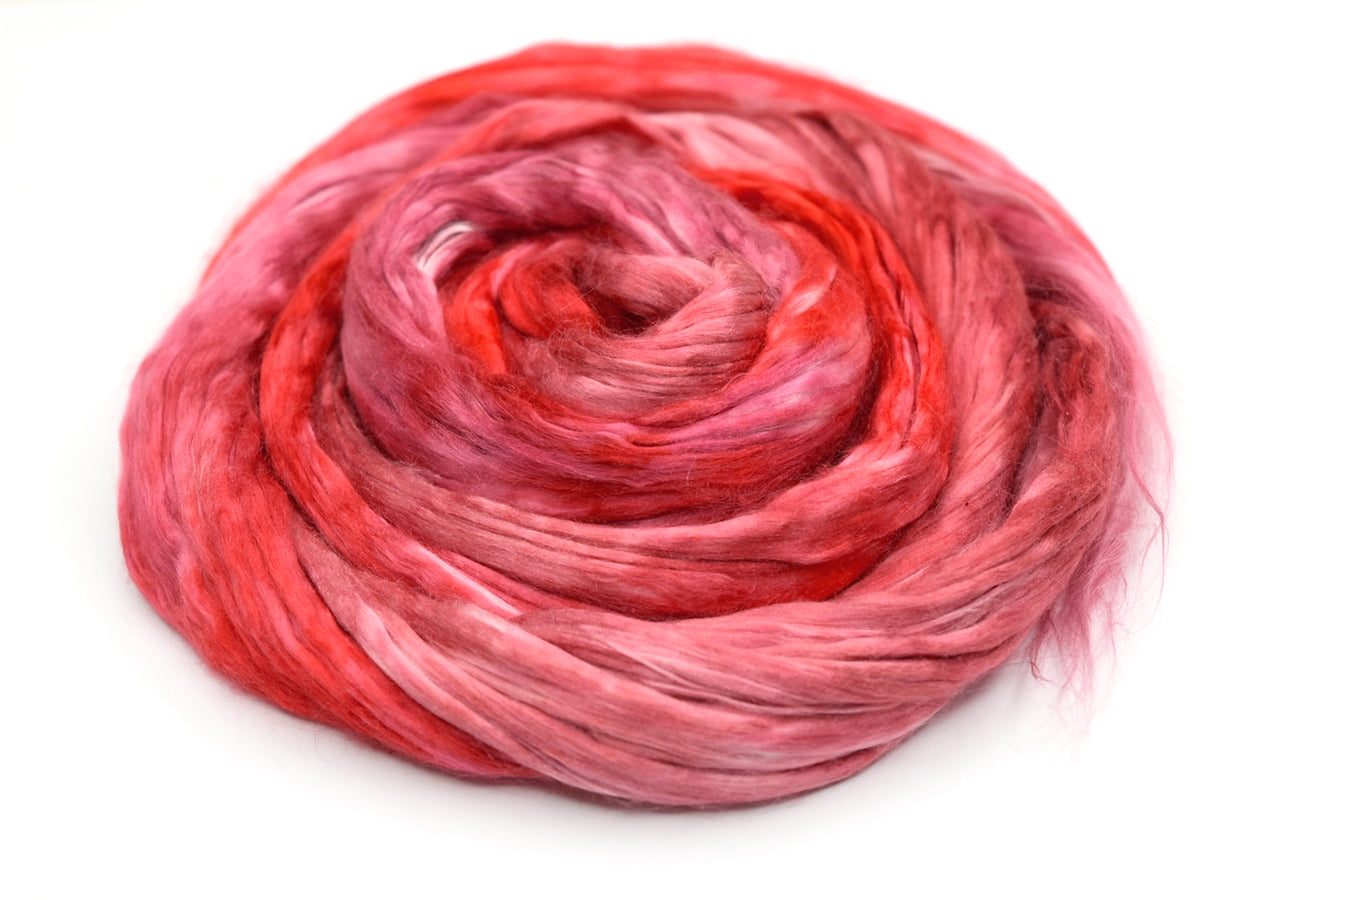 Mulberry Silk Roving Hand Dyed in Red Delicious| Silk Roving/Sliver | Sally Ridgway | Shop Wool, Felt and Fibre Online